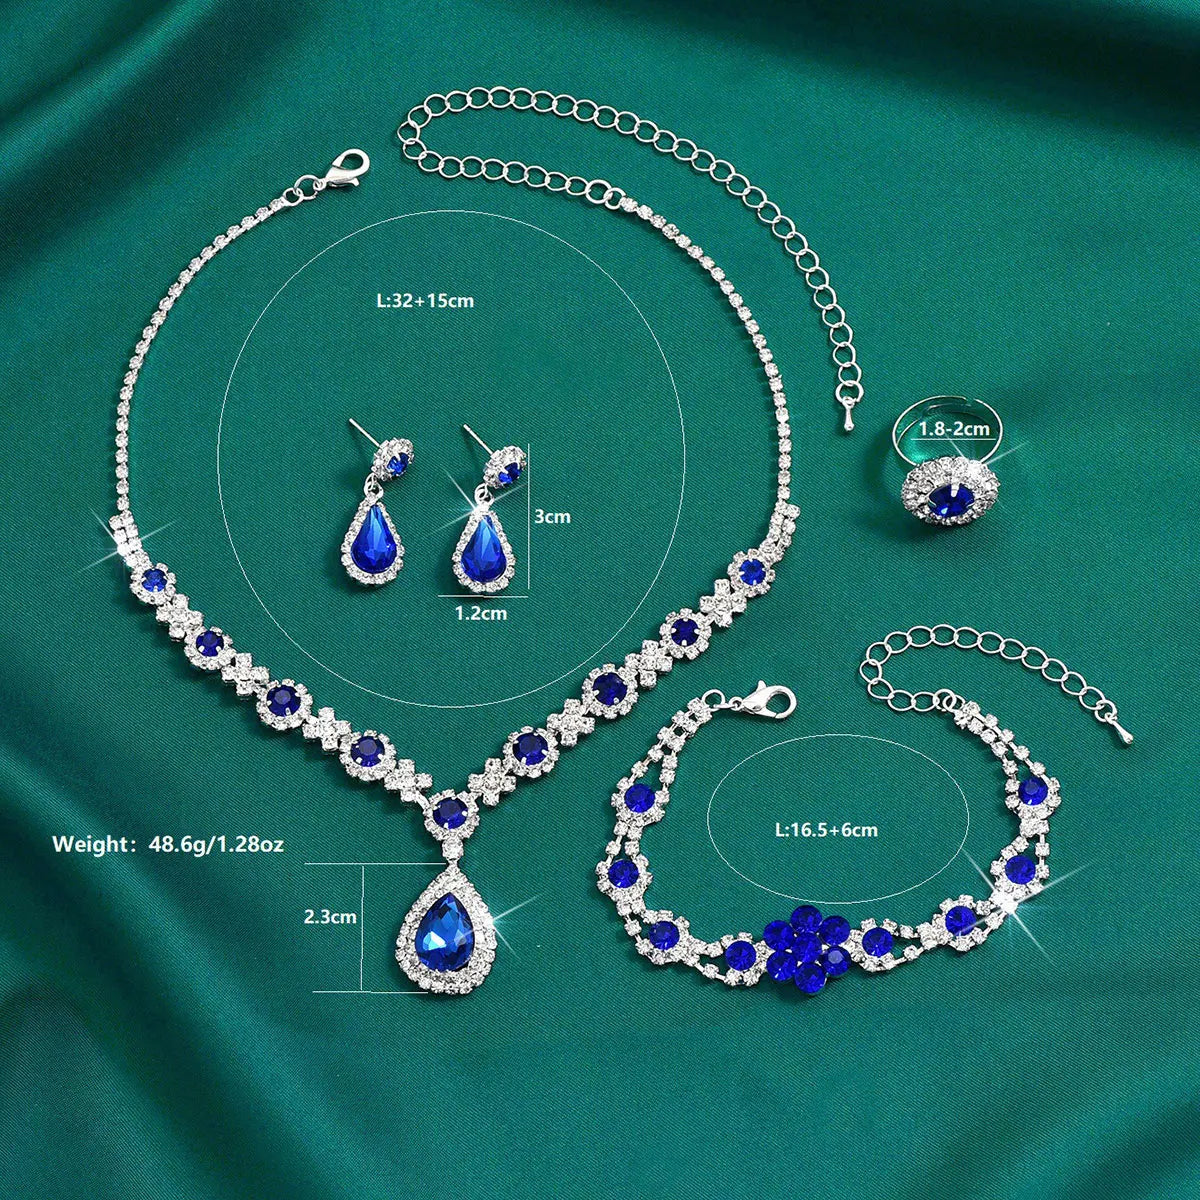 Silver Color Crystal Drop Necklace Earrings Bracelet Ring Jewelry Set